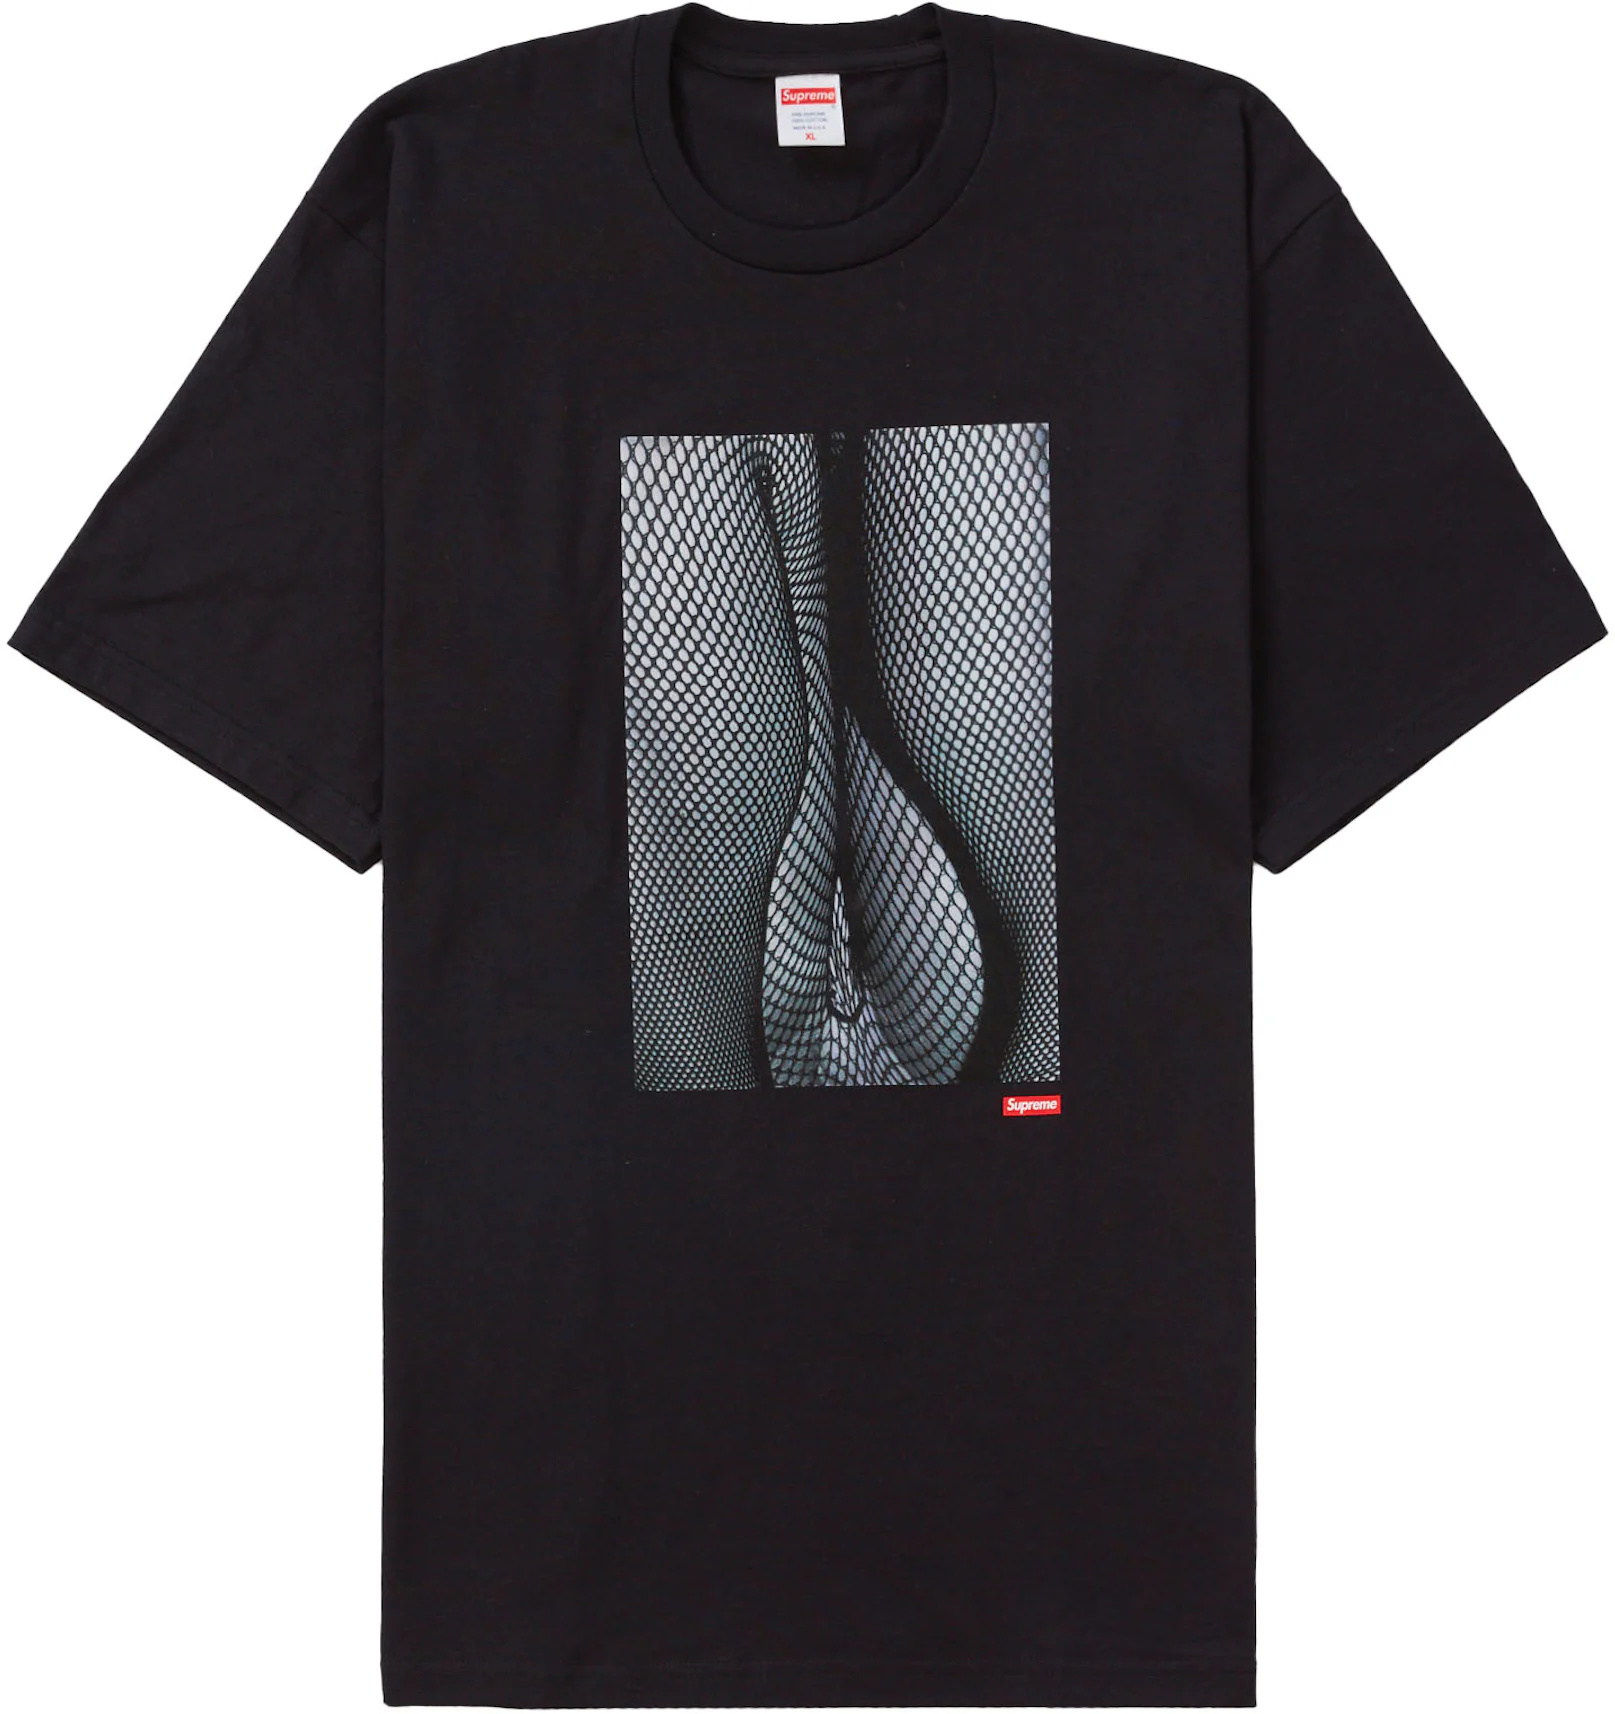 T-shirt Supreme Black size S International in Polyester - 41469790